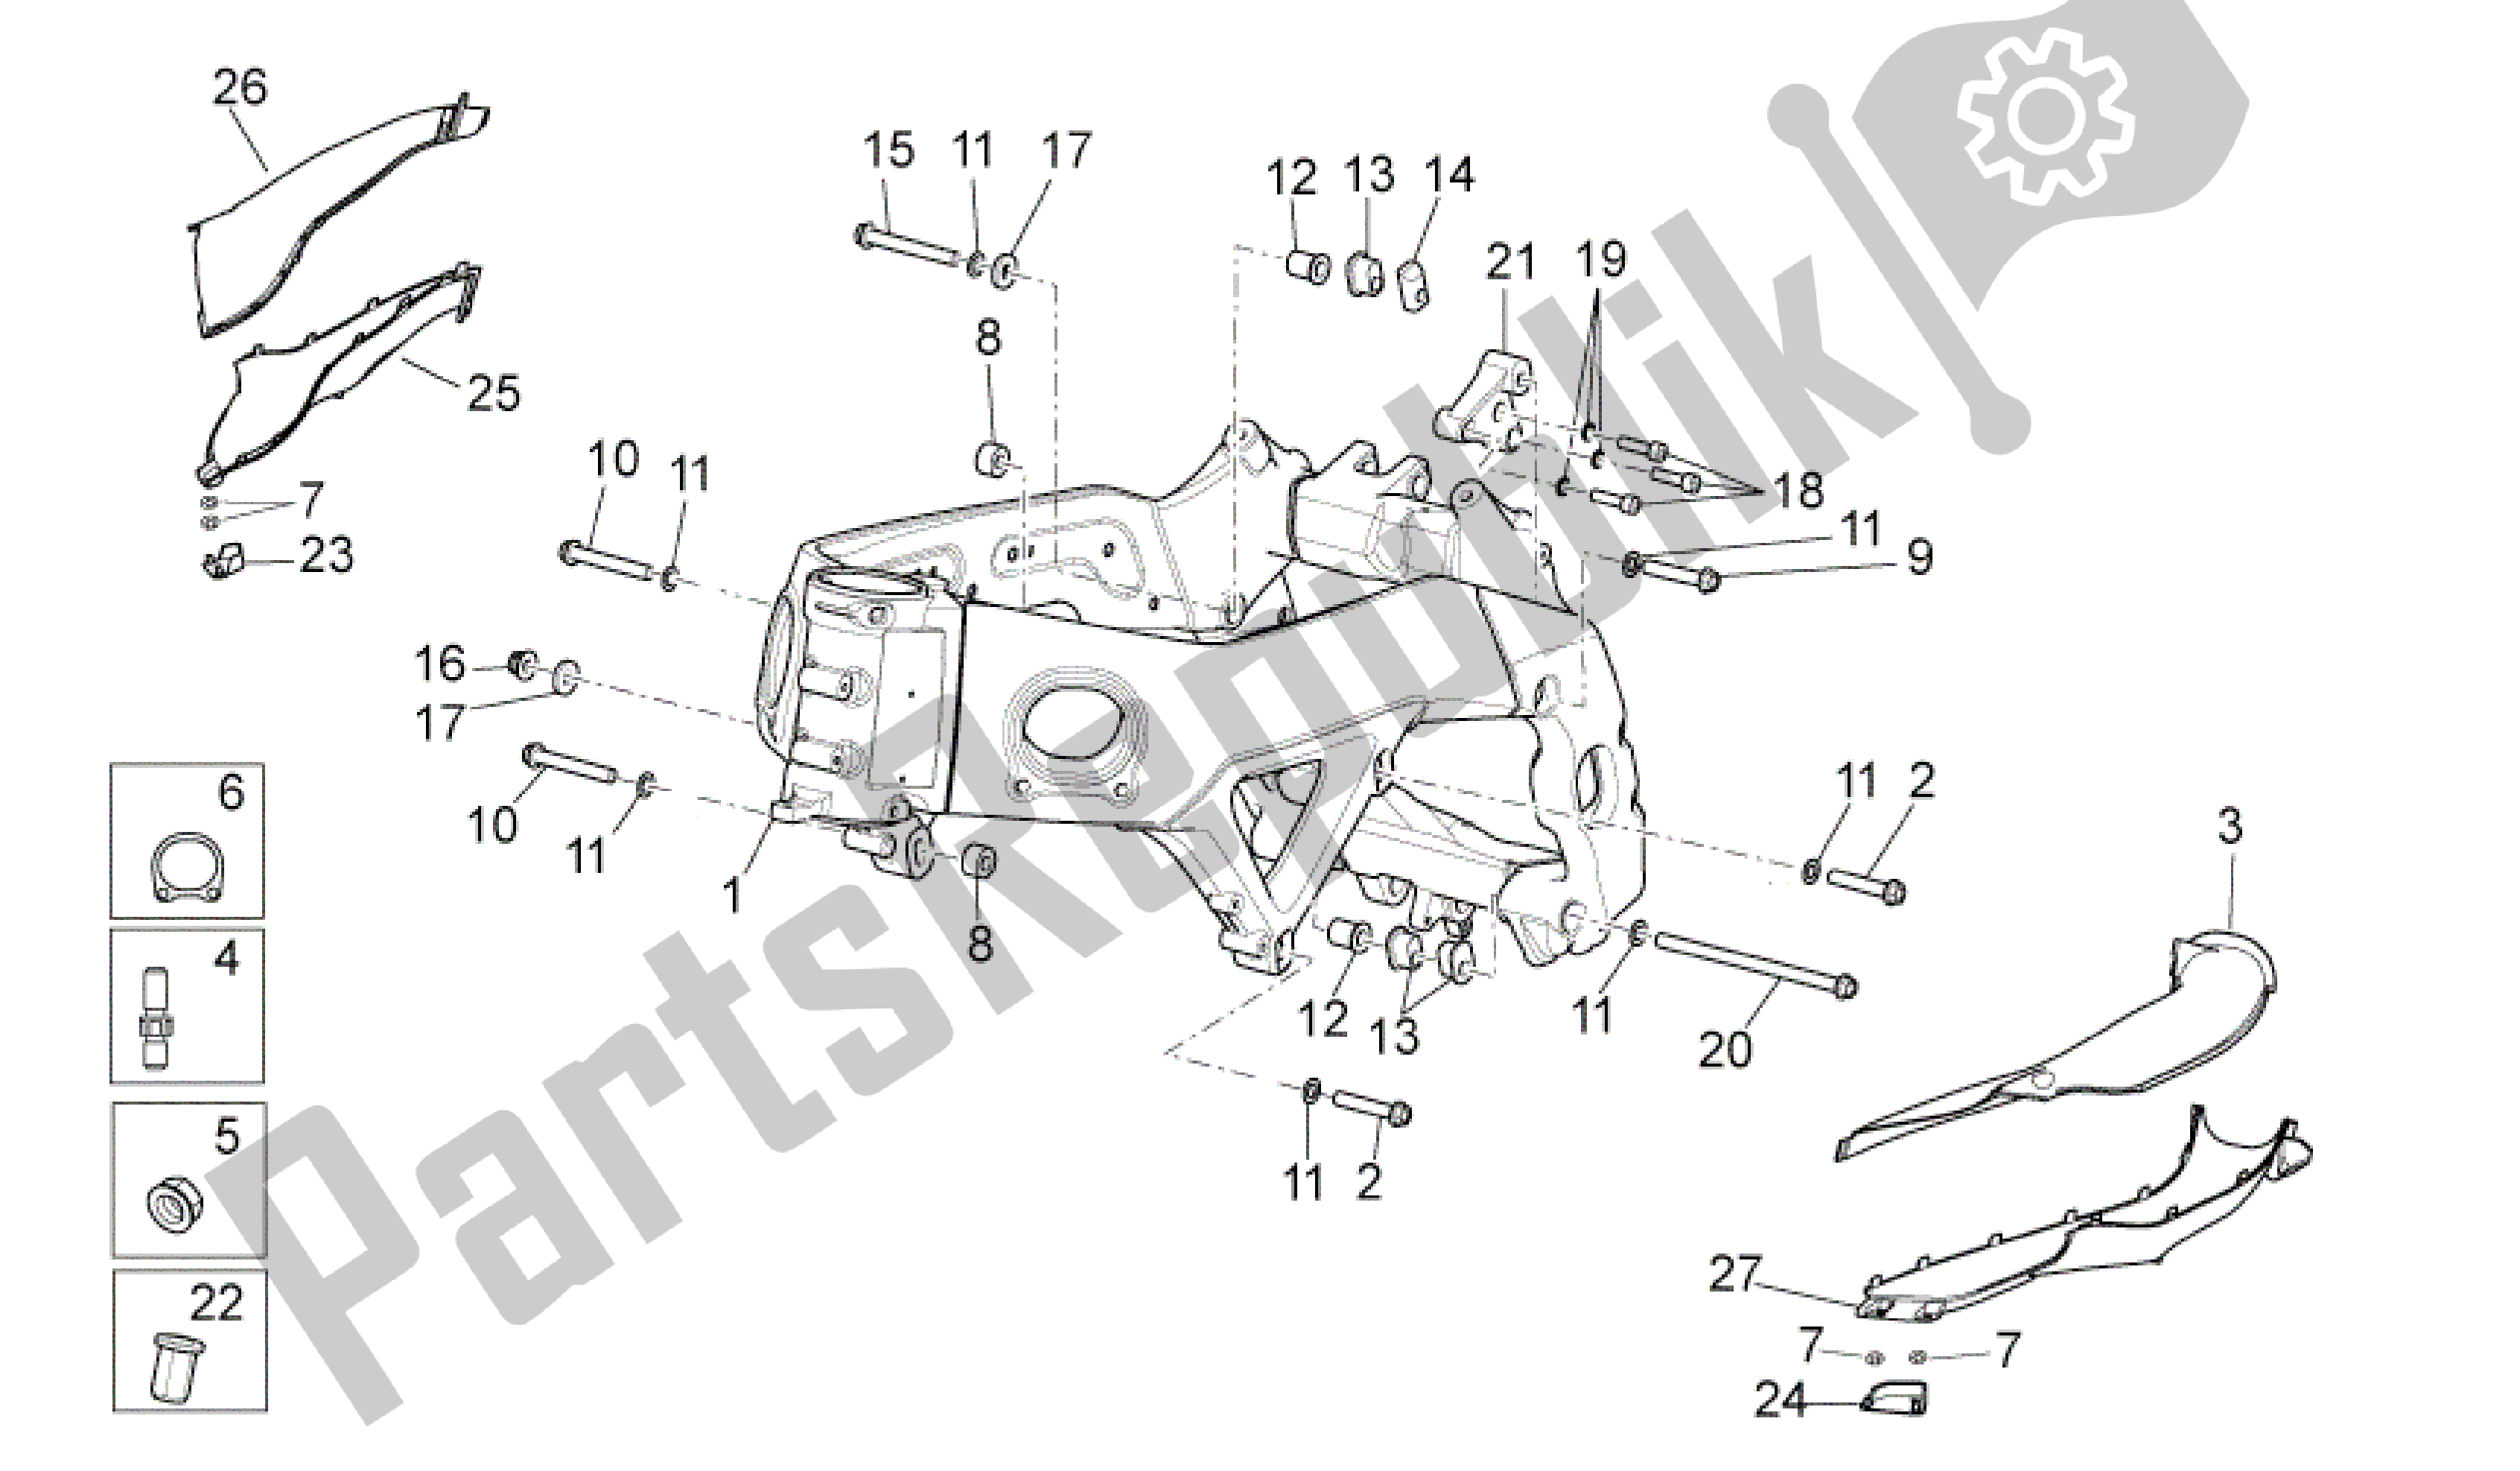 All parts for the Frame I of the Aprilia RSV4 Aprc R ABS 3984 1000 2013